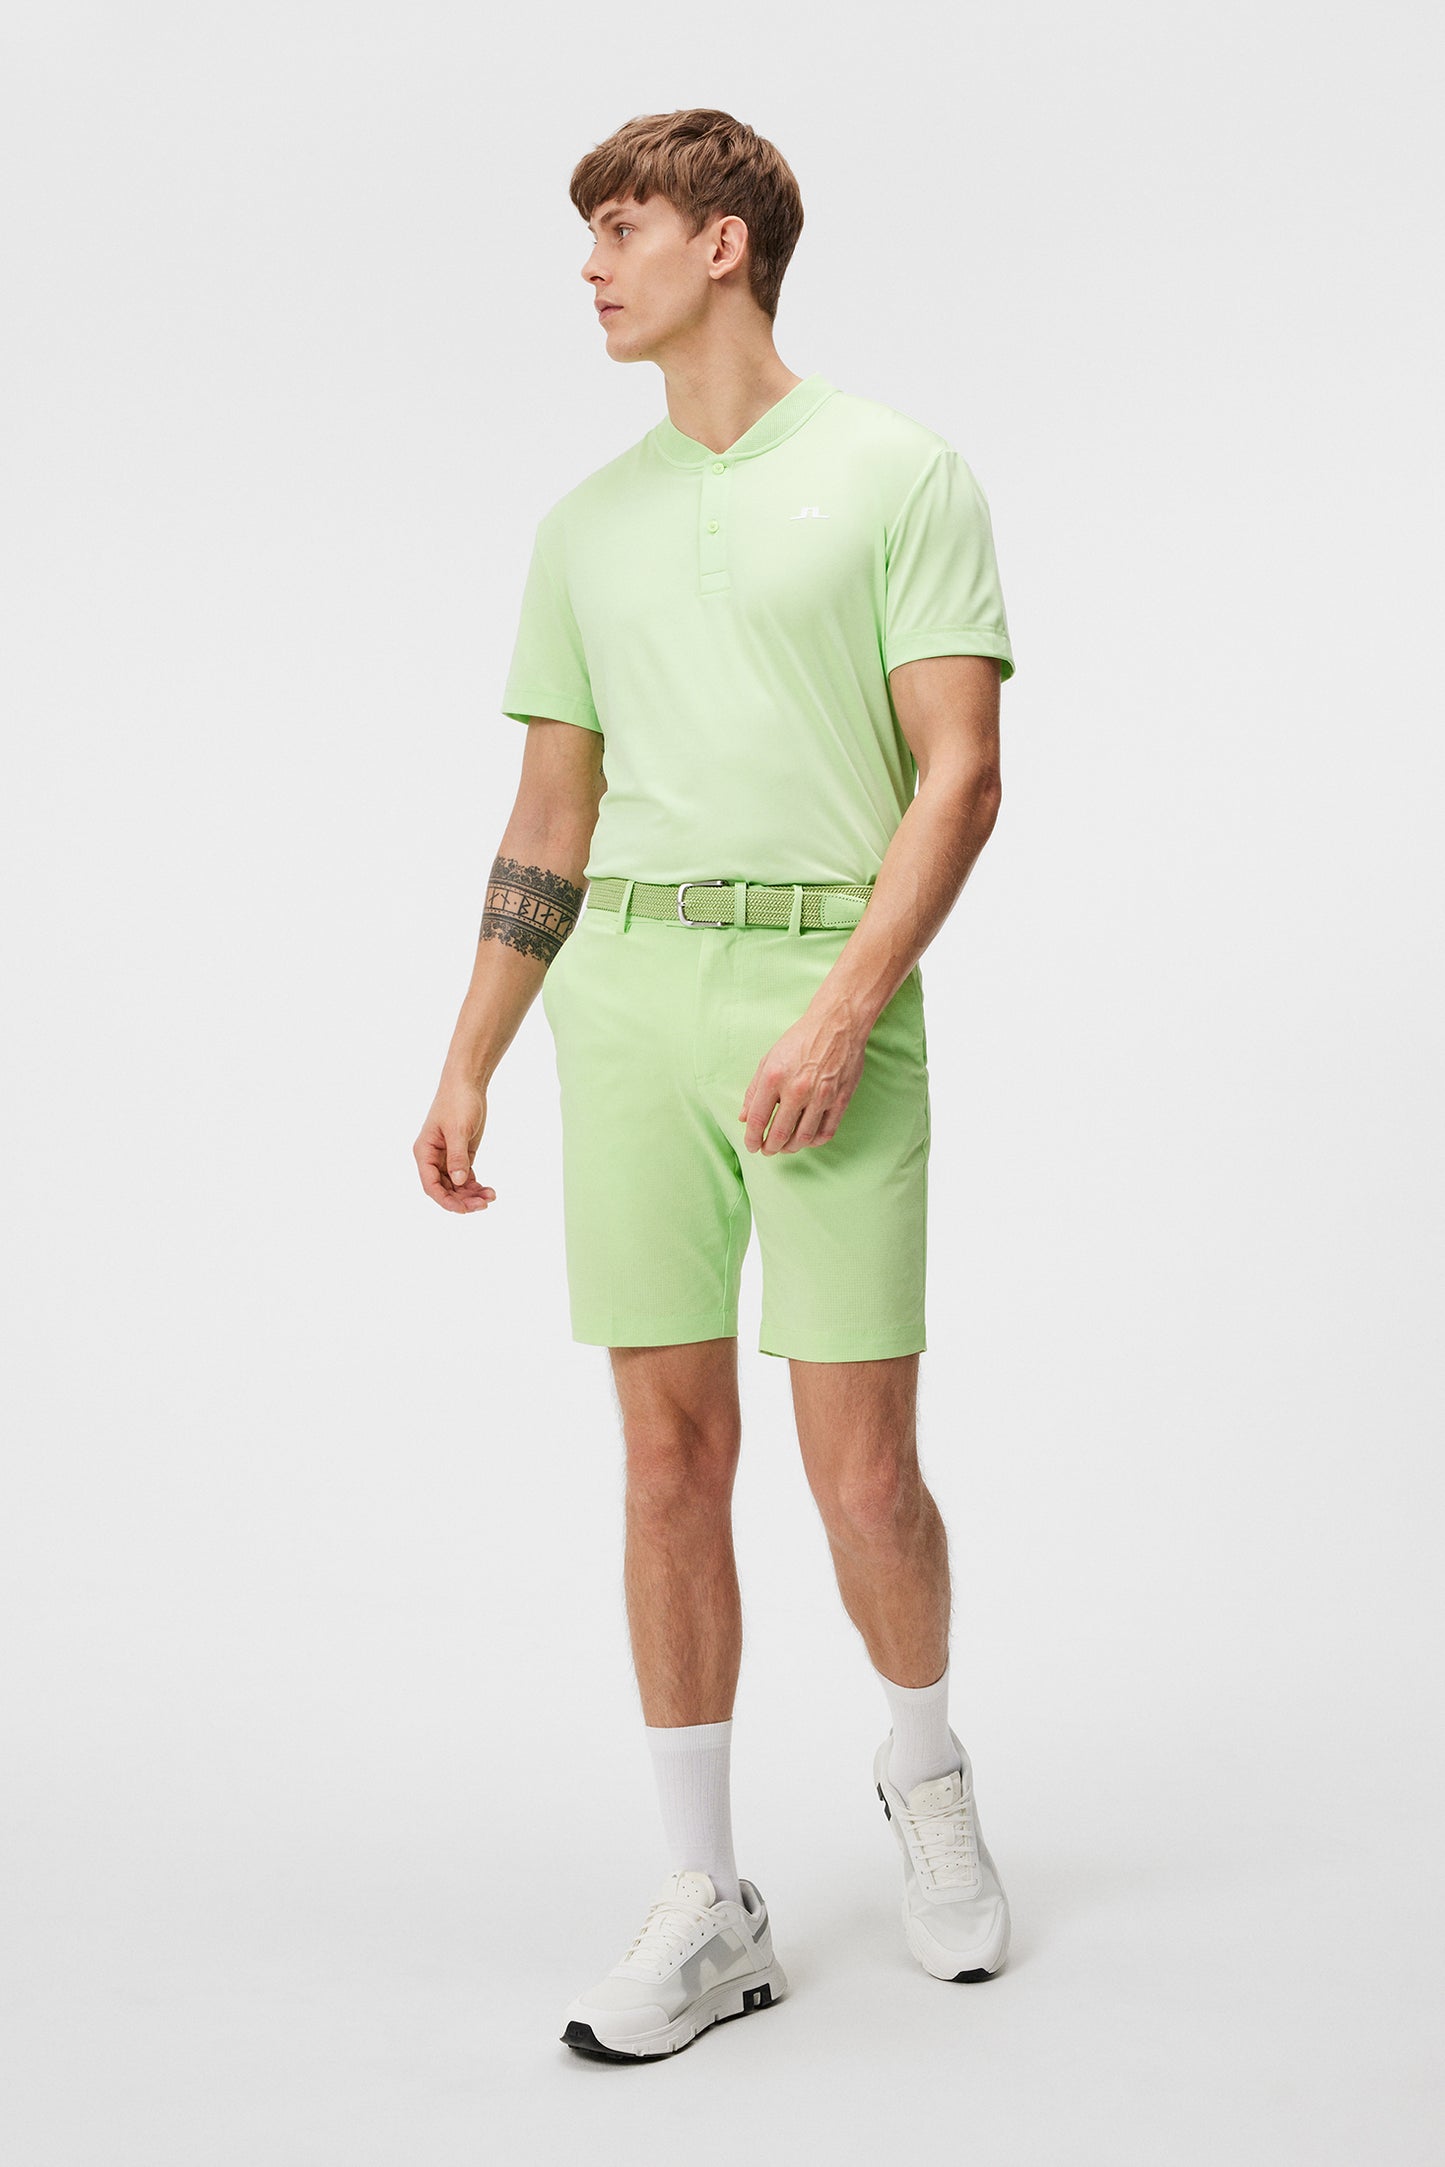 Wince Reg Fit Polo / Paradise Green